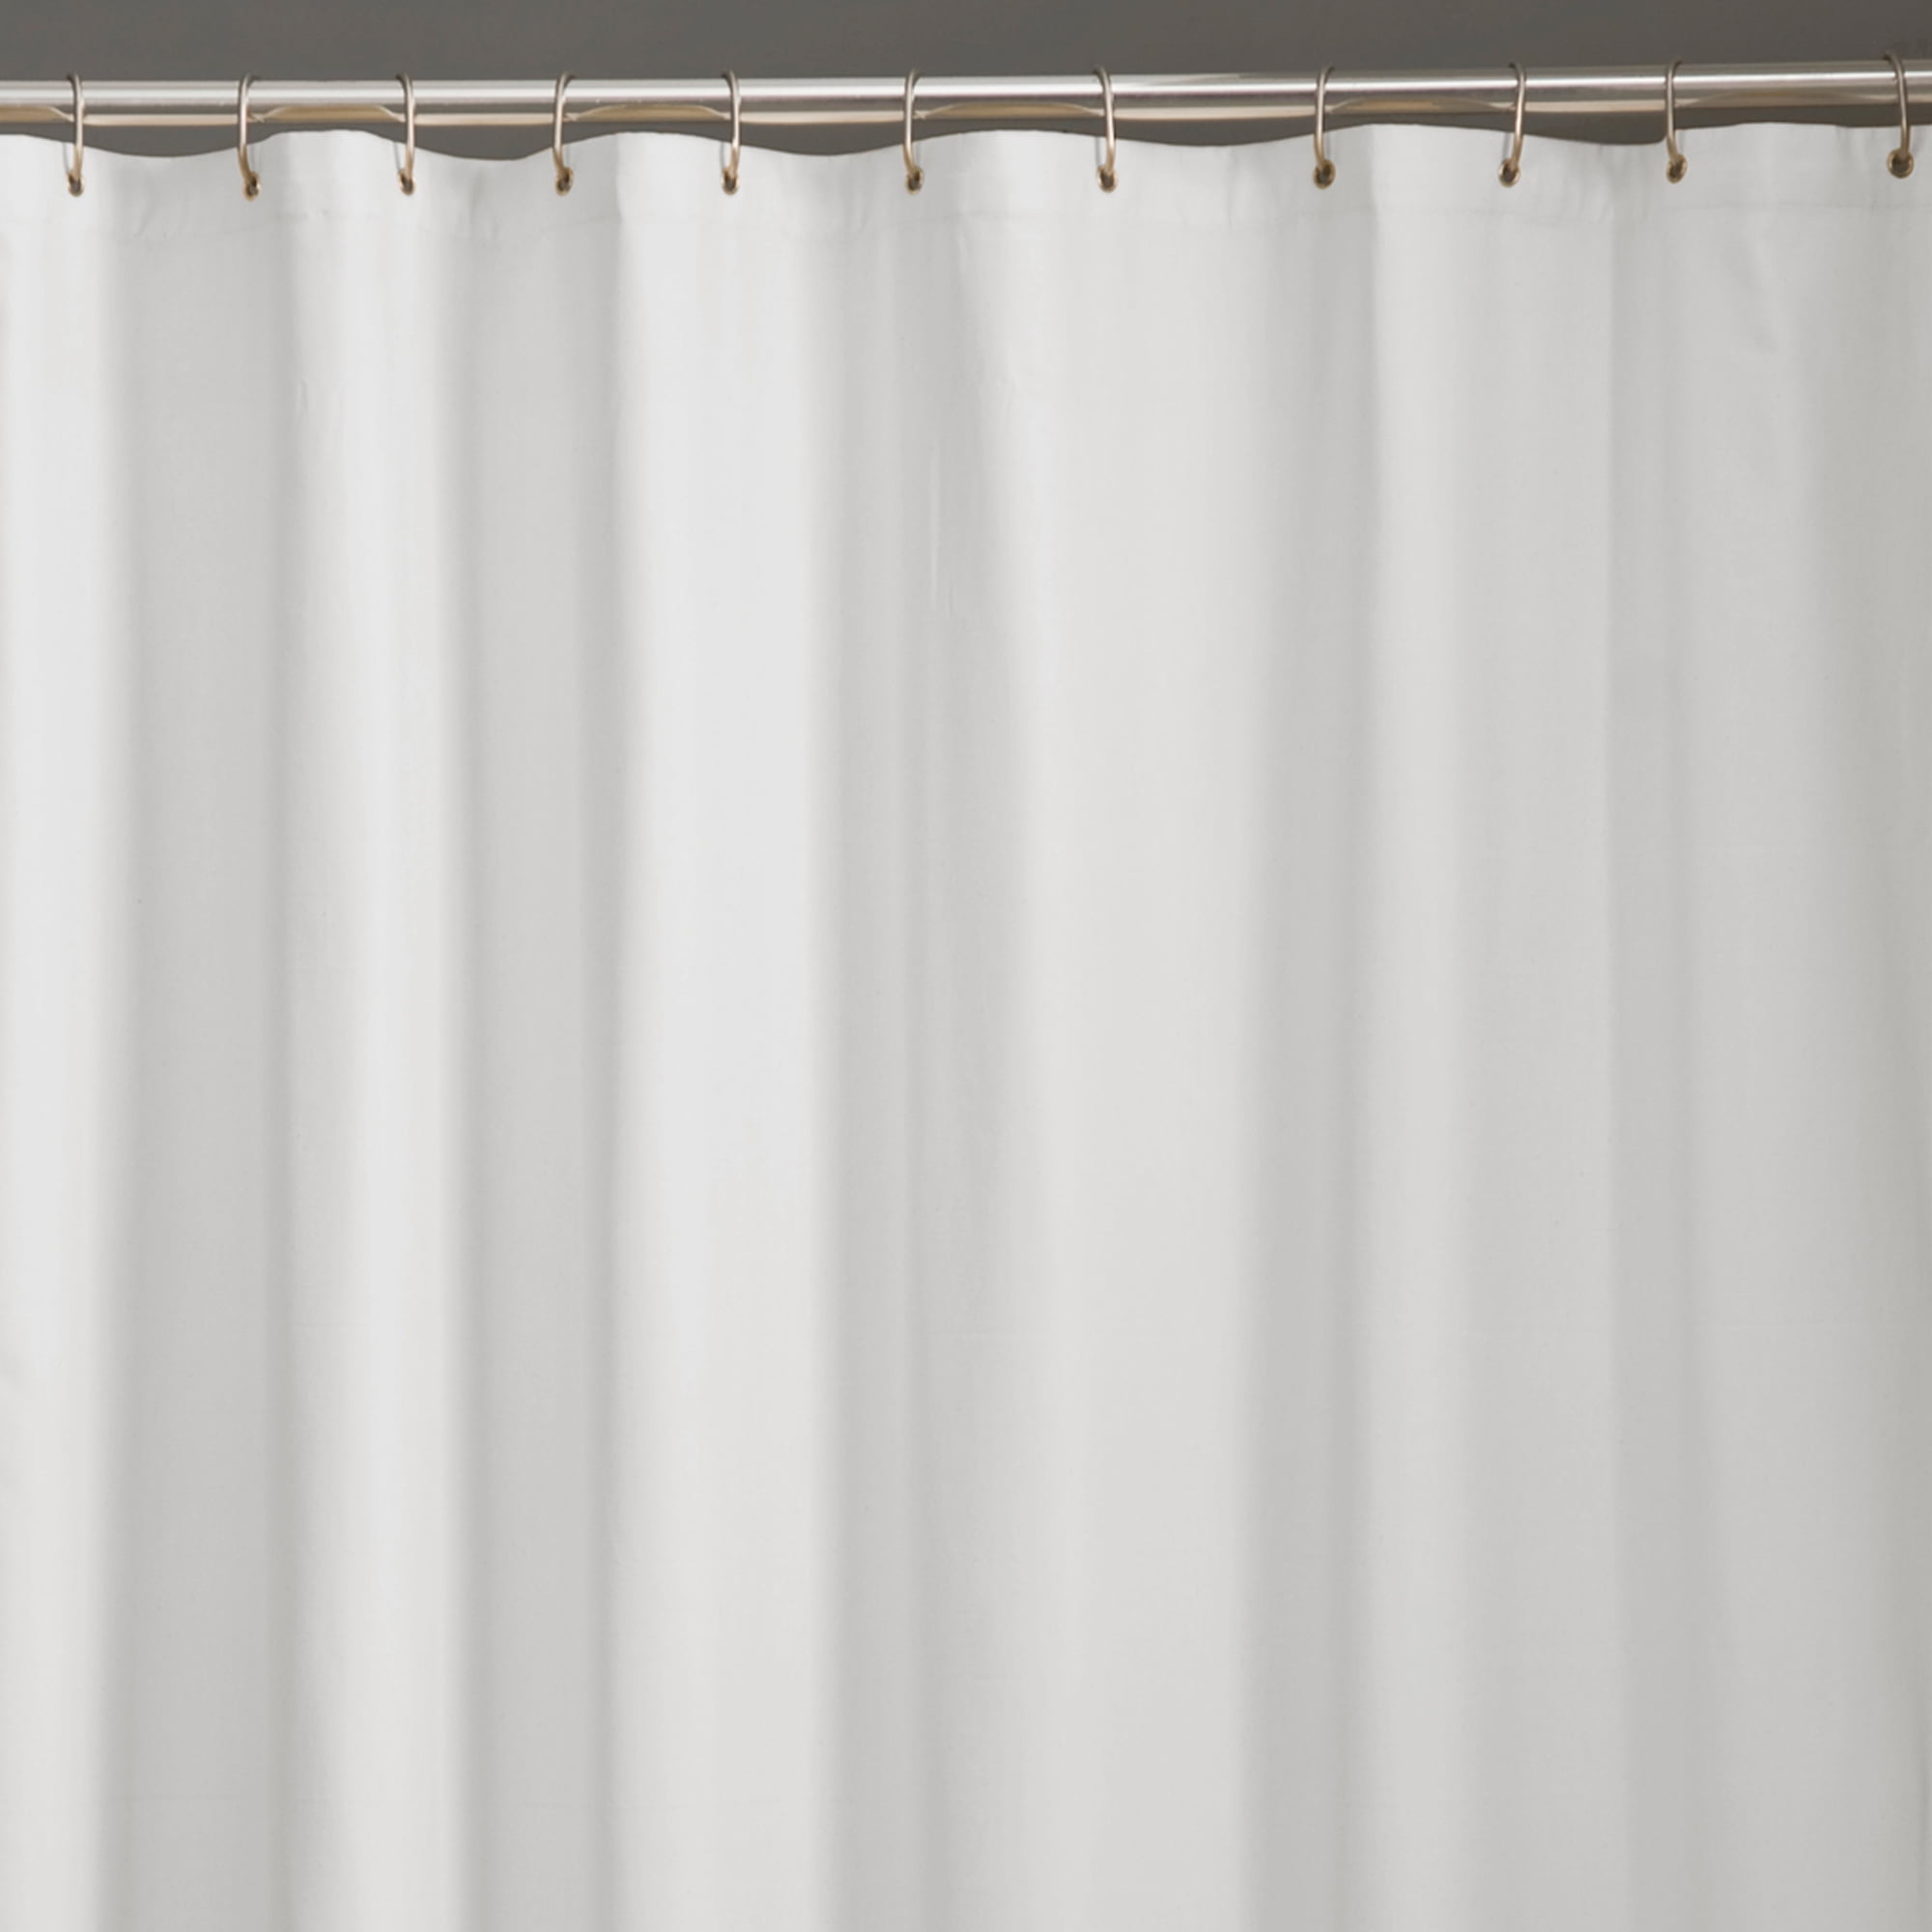 Details about   Spectacular Waterproof Bathroom Polyester Shower Curtain Liner Water Resistant 